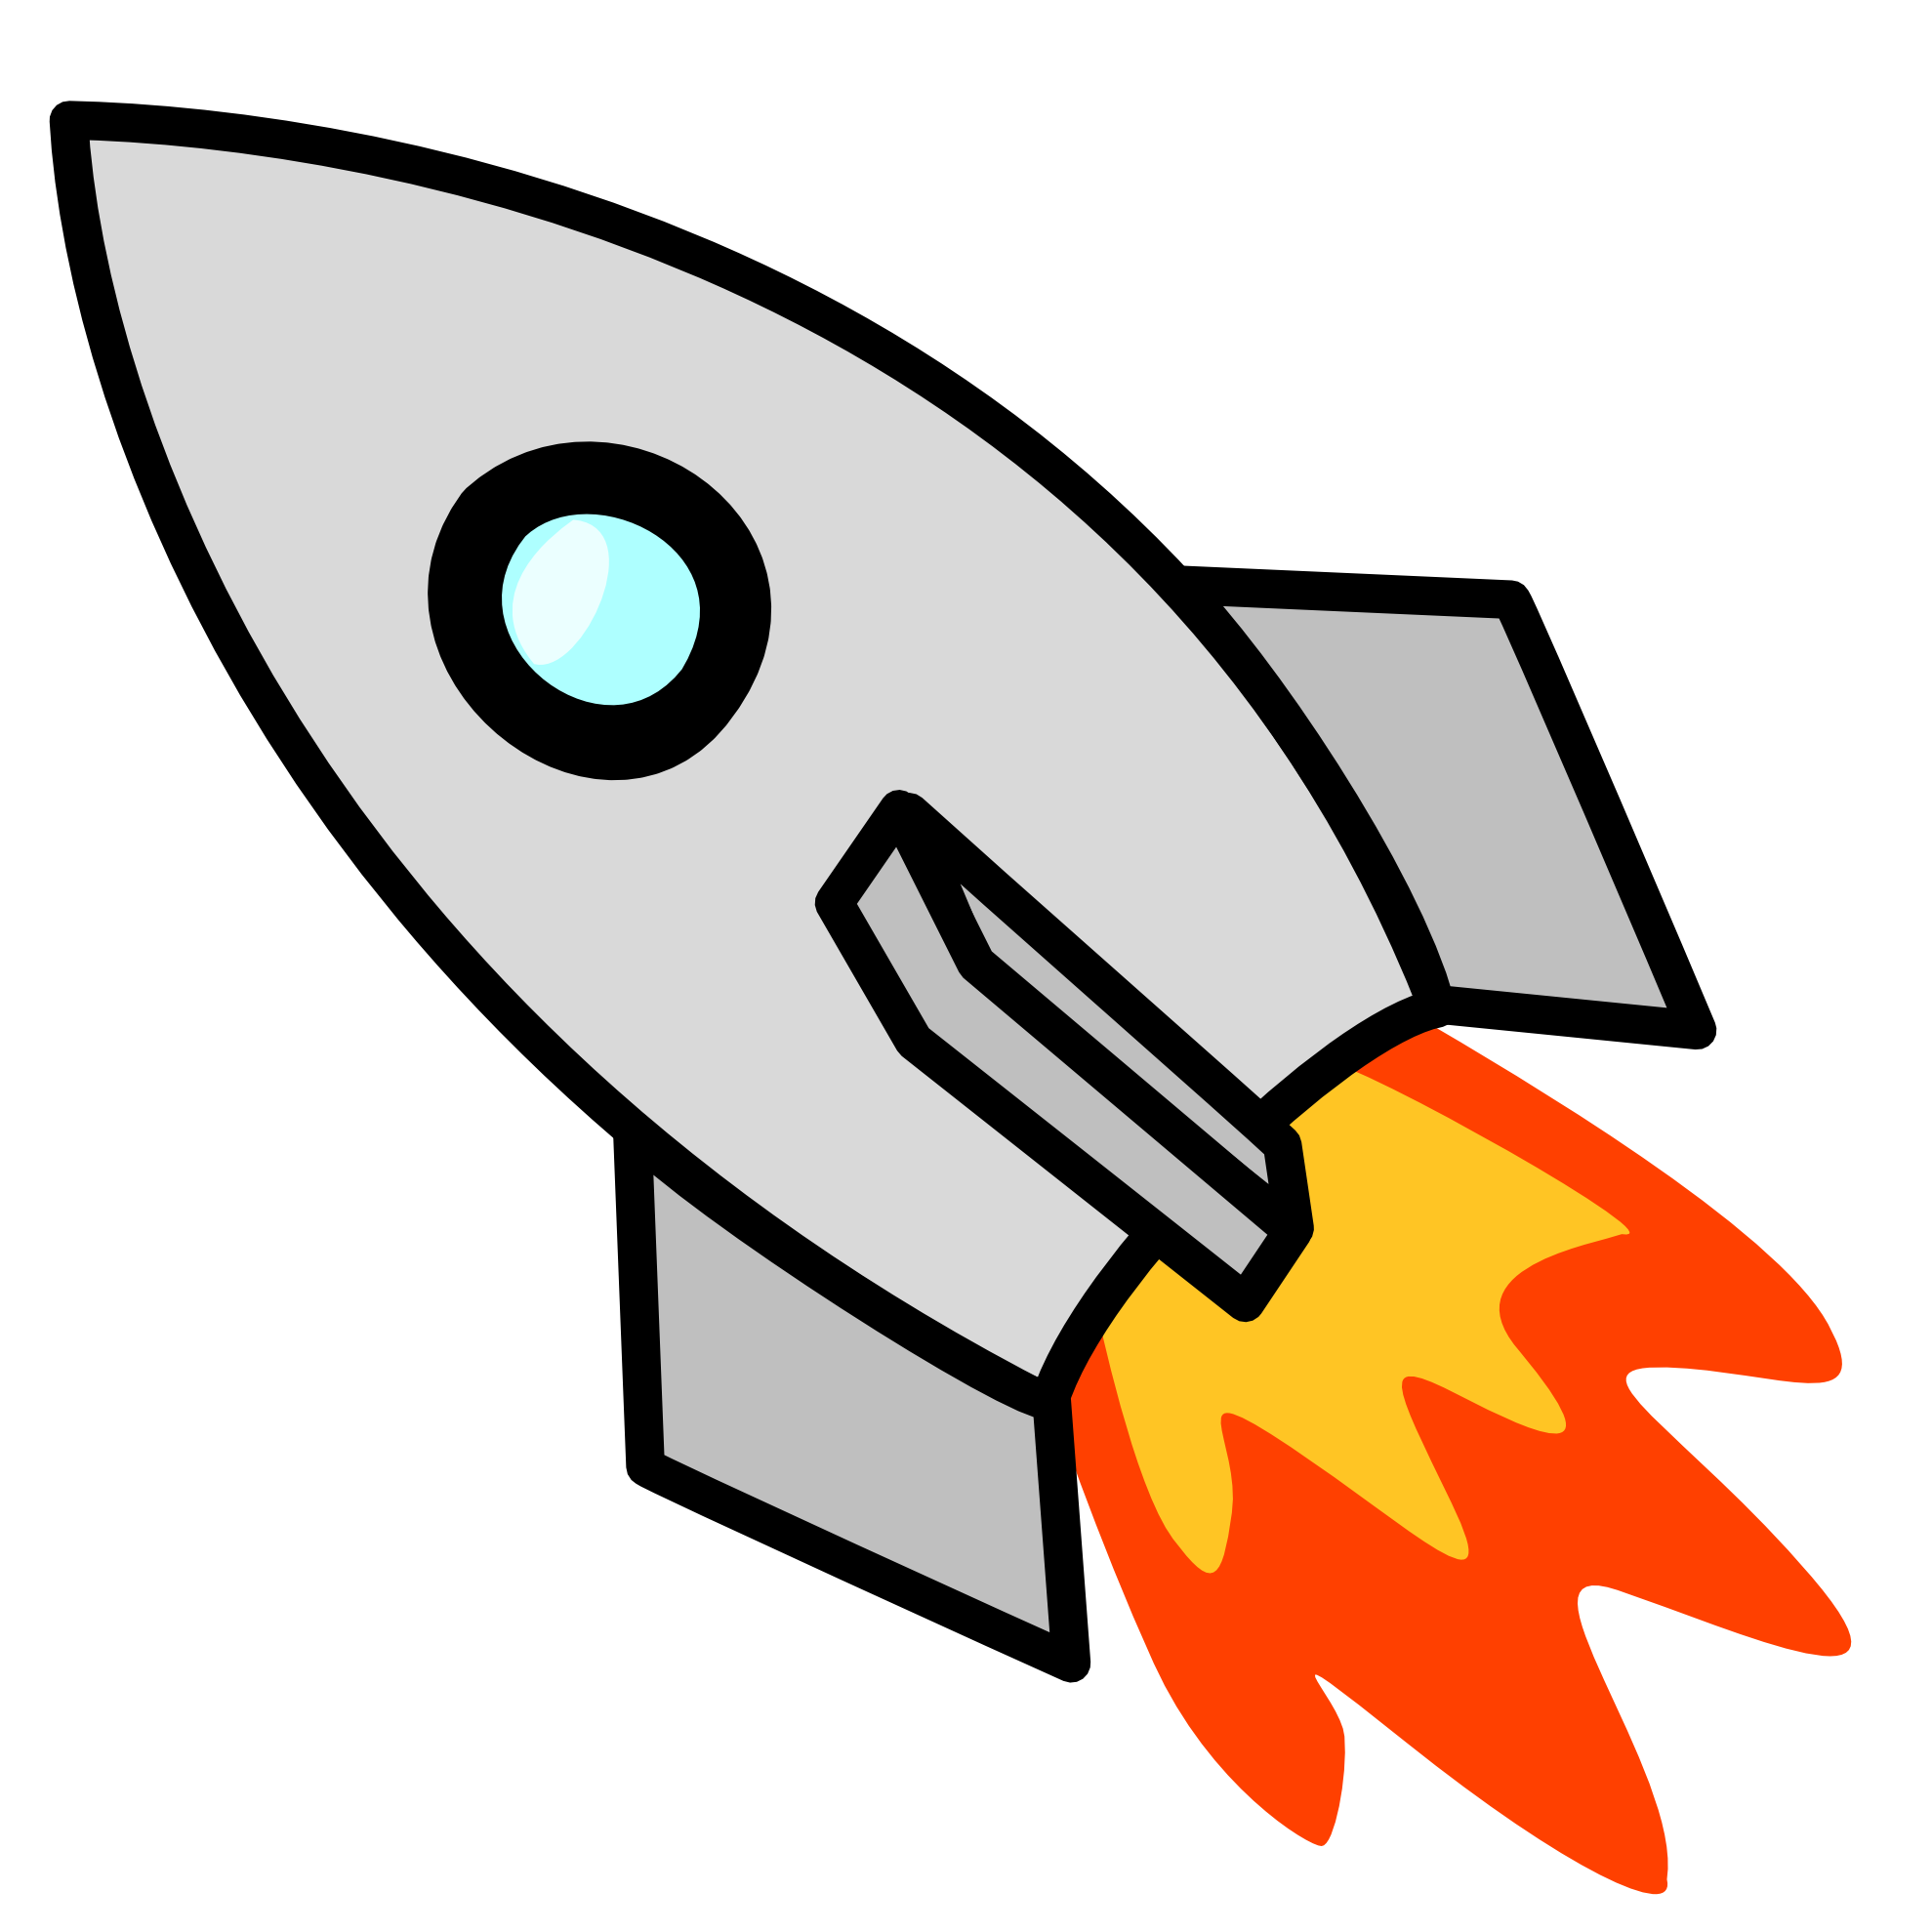 Rocket clipart black and white free clipart images